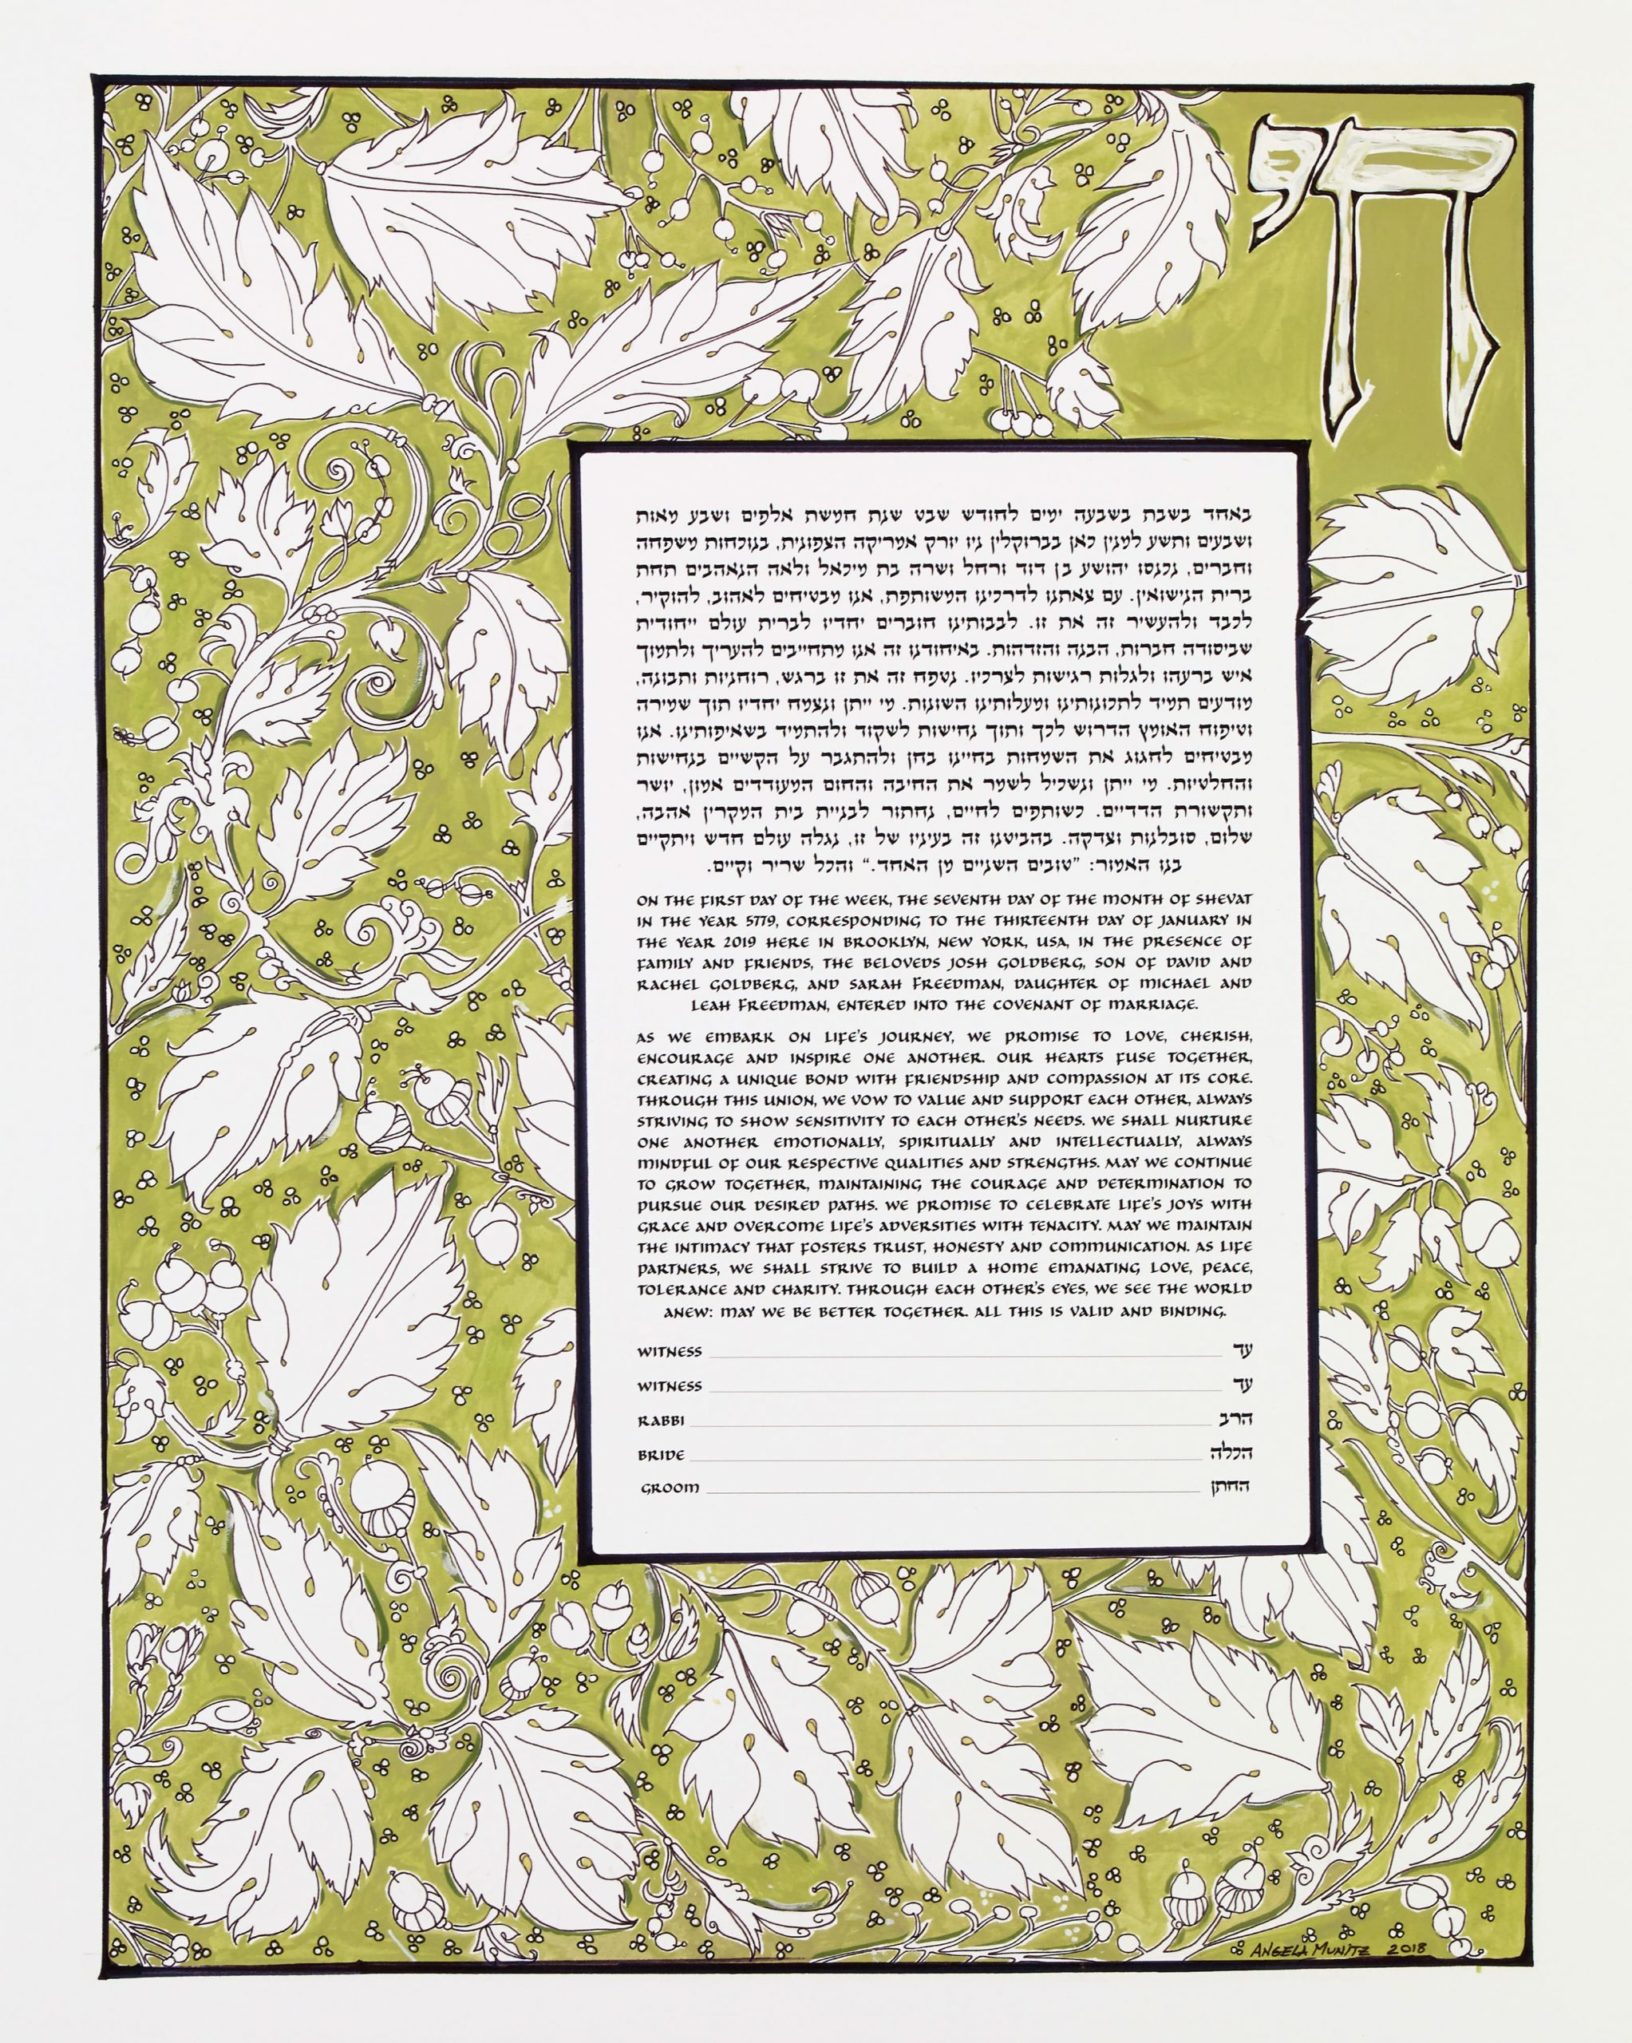 Verdant Green Ketubah Jewish Marriage Contracts by Angela Munitz